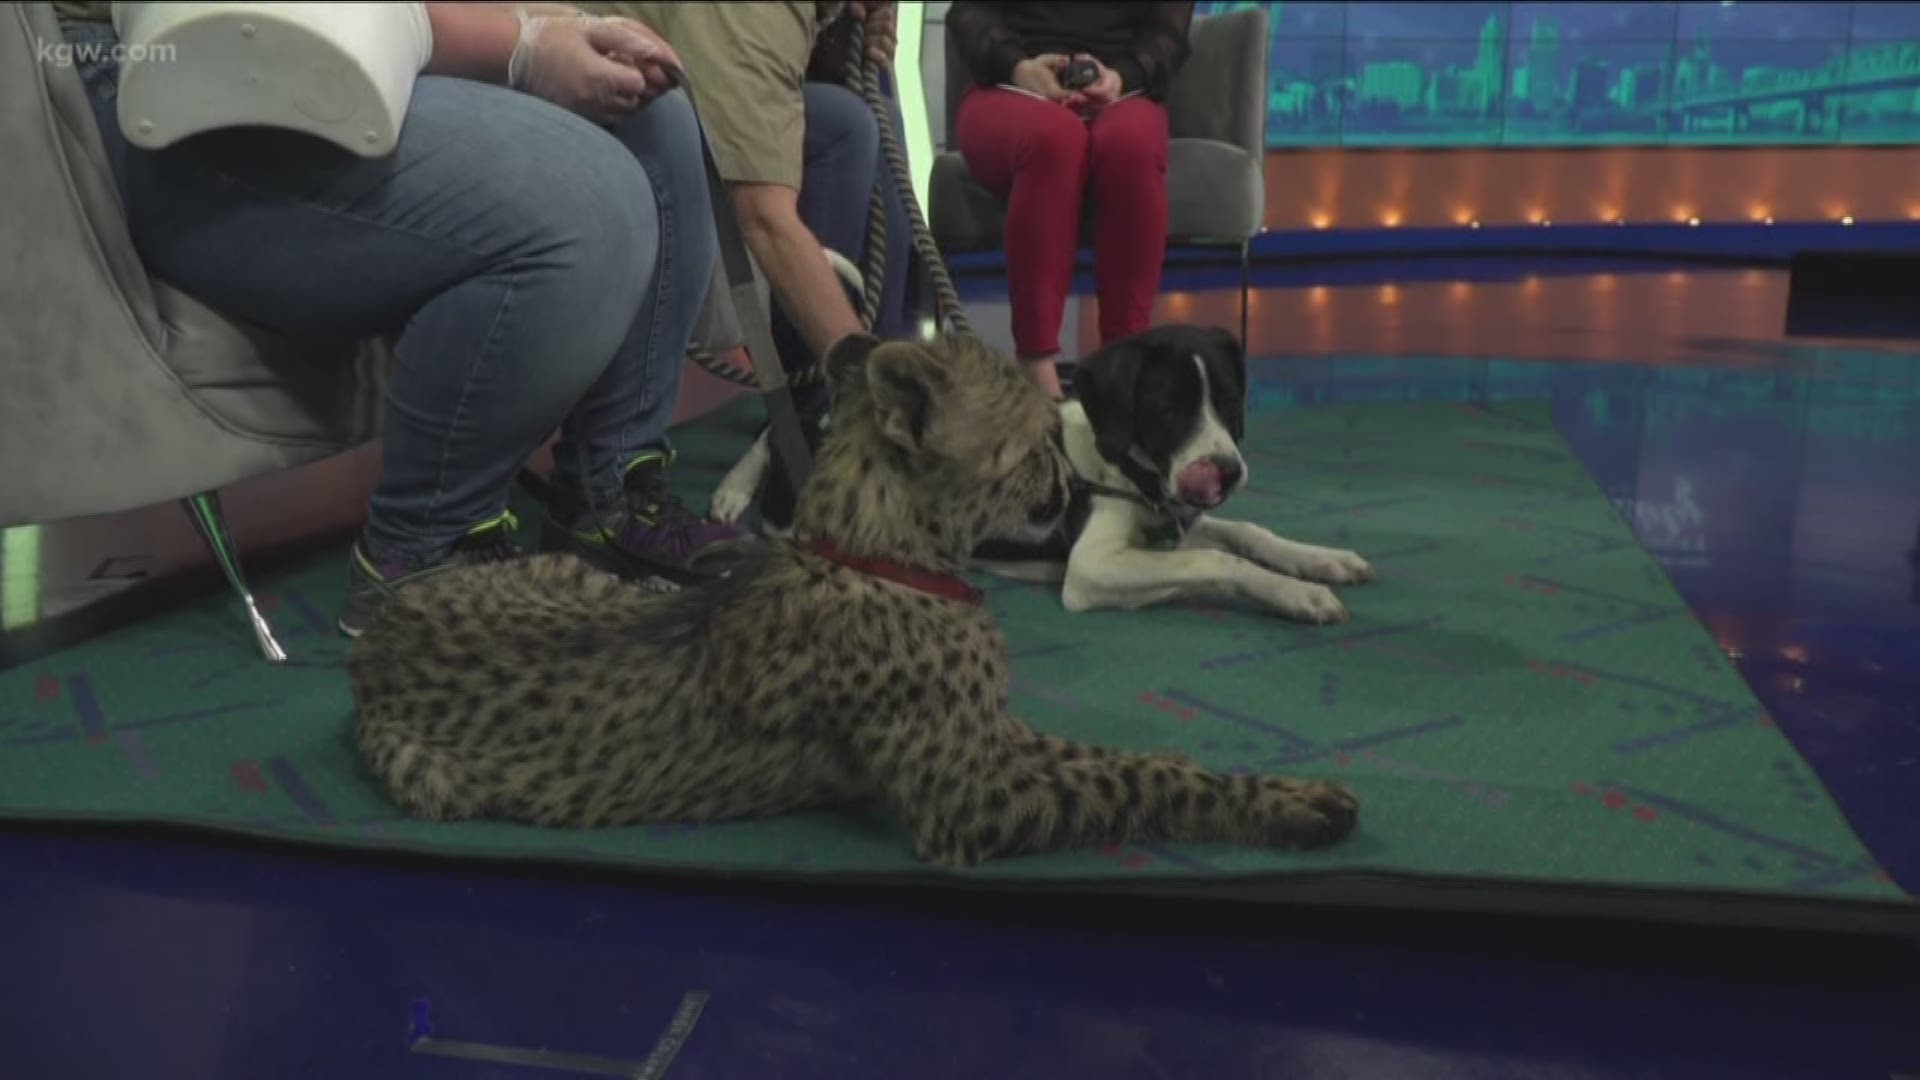 You have to go to Wildlife Safari in Winston to meet a baby cheetah and puppy who will be best friends forever.
wildlifesafari.net
#TonightwithCassidy